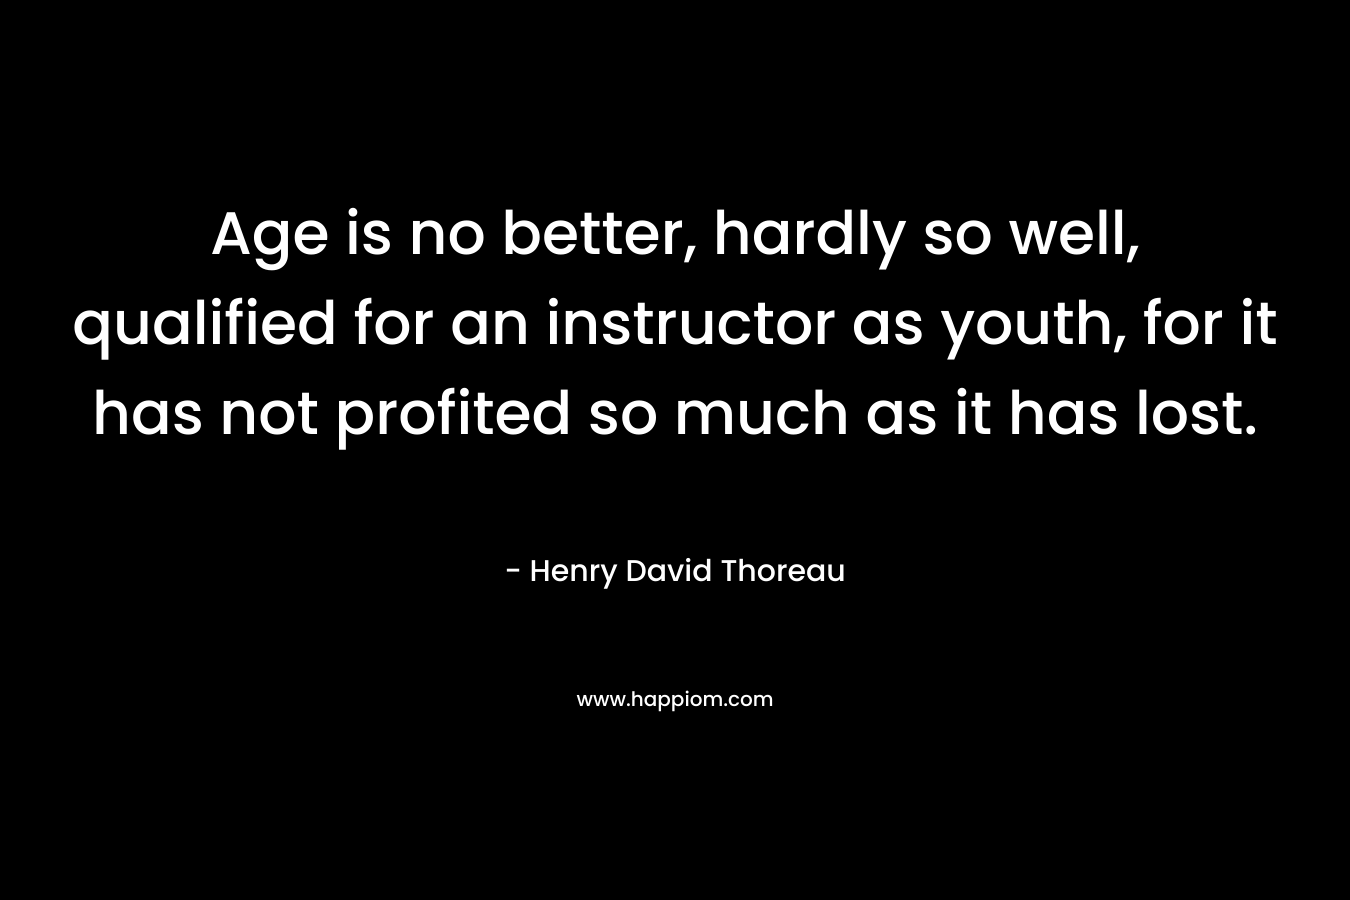 Age is no better, hardly so well, qualified for an instructor as youth, for it has not profited so much as it has lost. – Henry David Thoreau